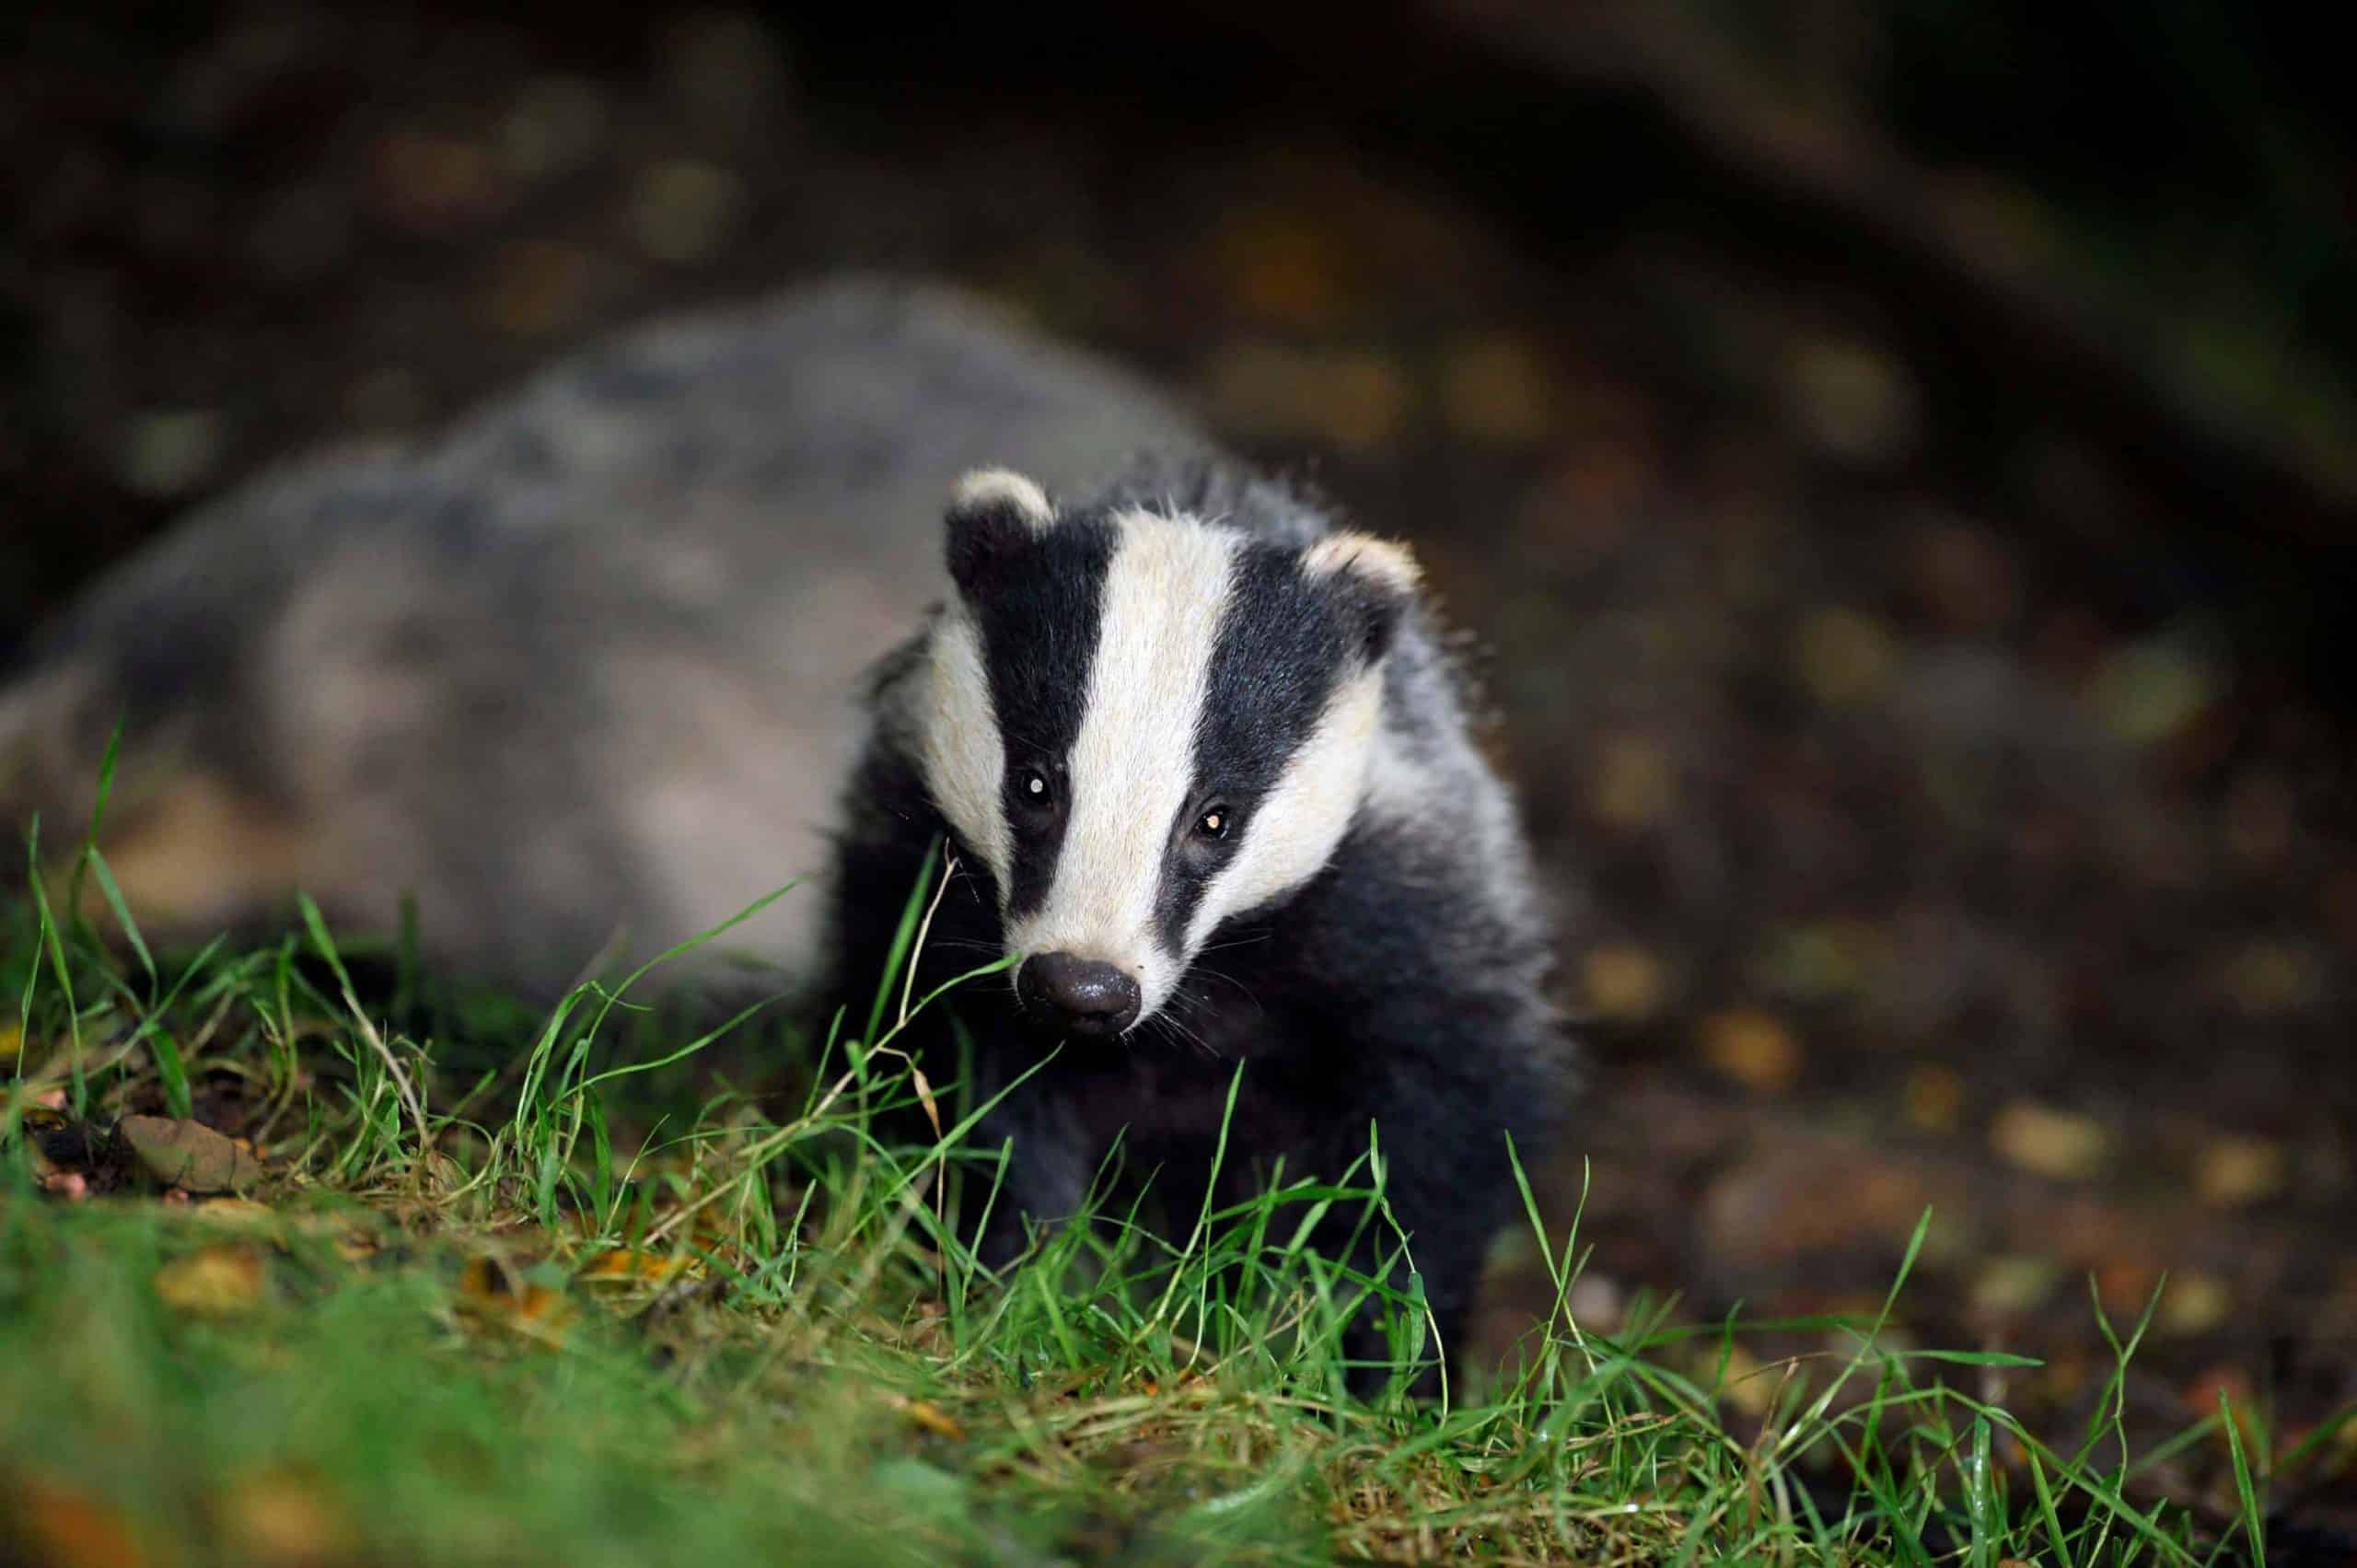 Culling badgers ‘actually spreads deadly bovine TB’ suggests new study